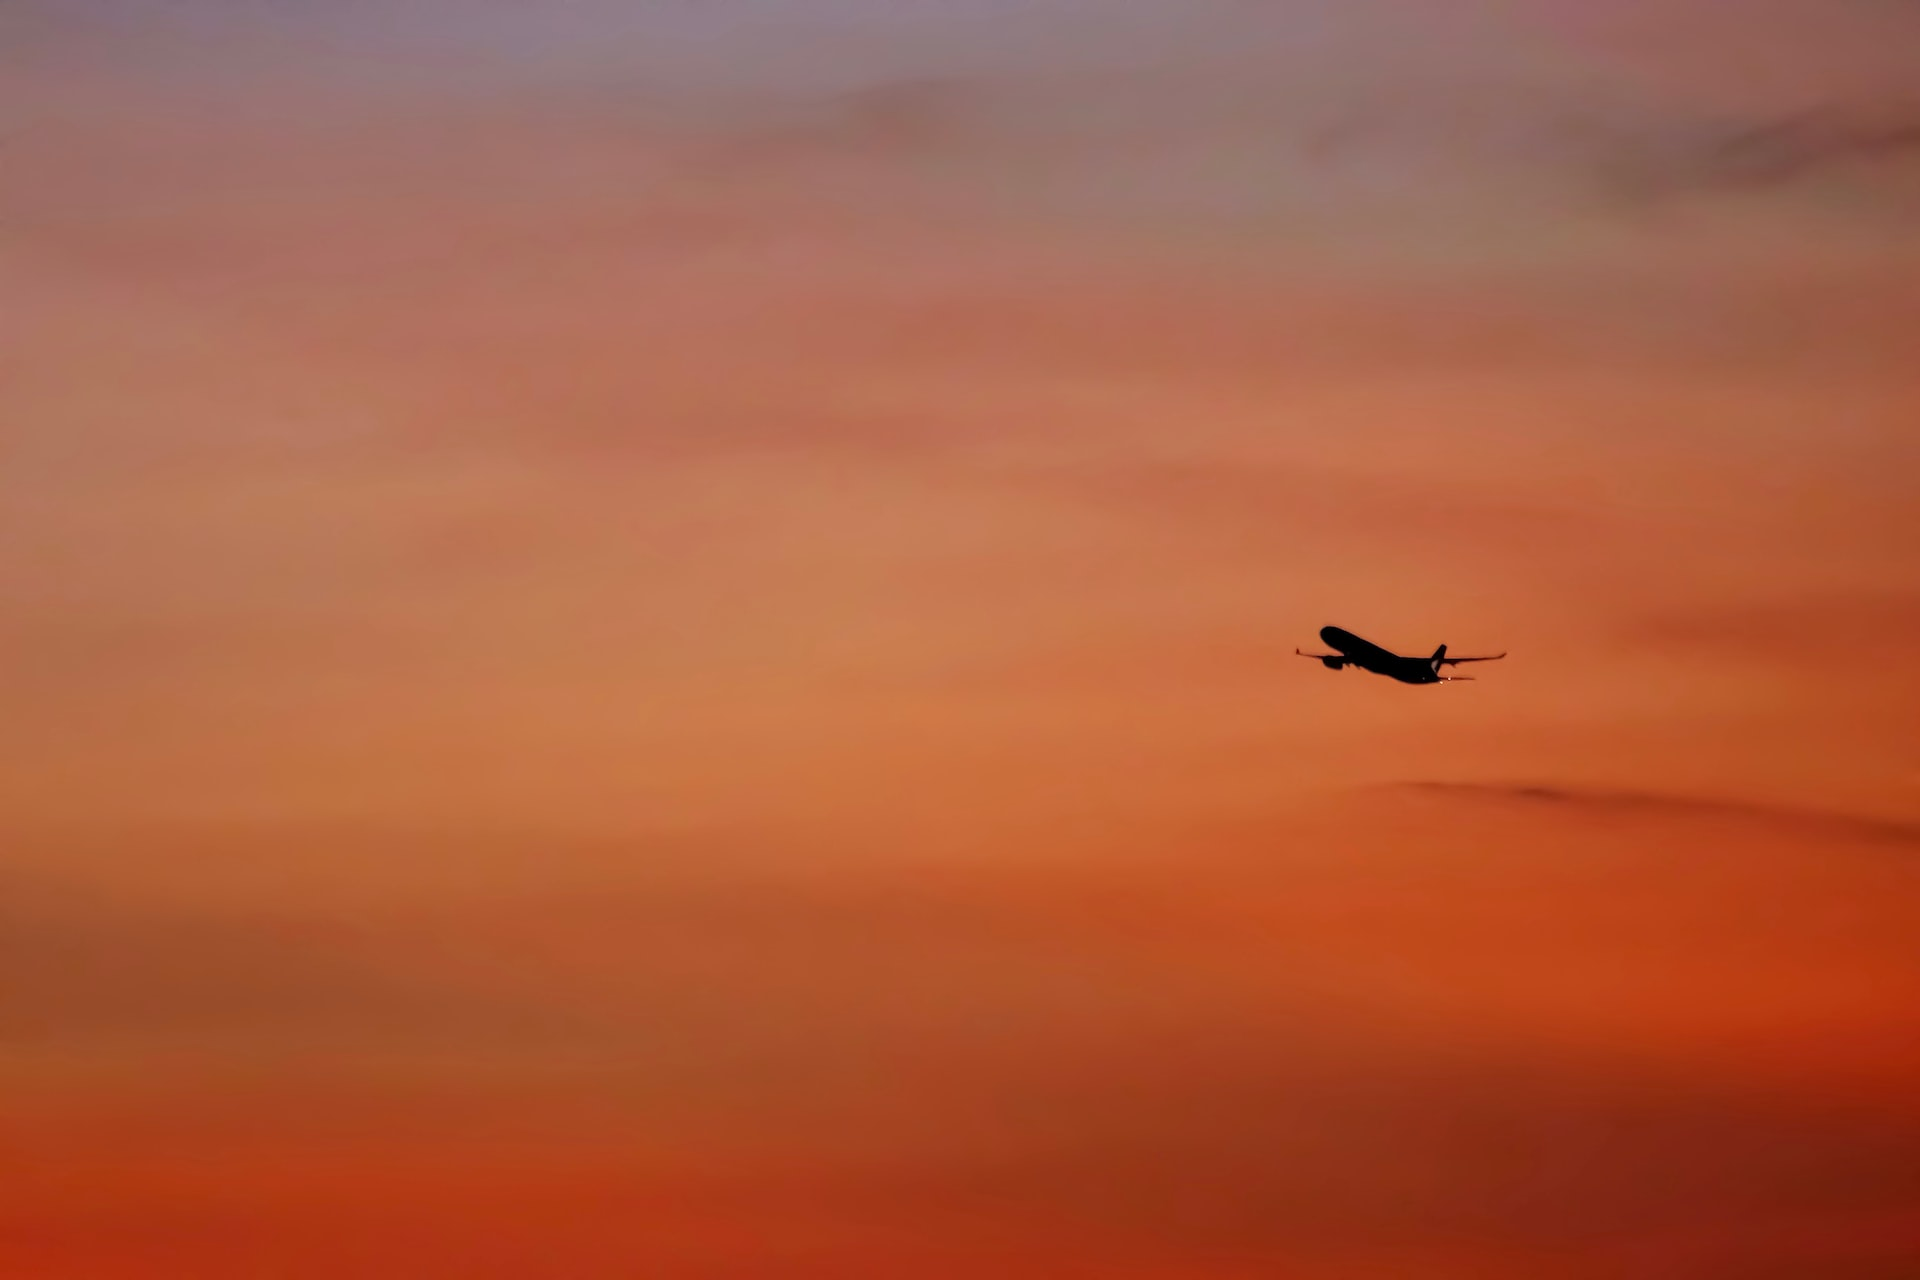 An aircraft taking off in an evening sky. How long does it take to fly around the world?